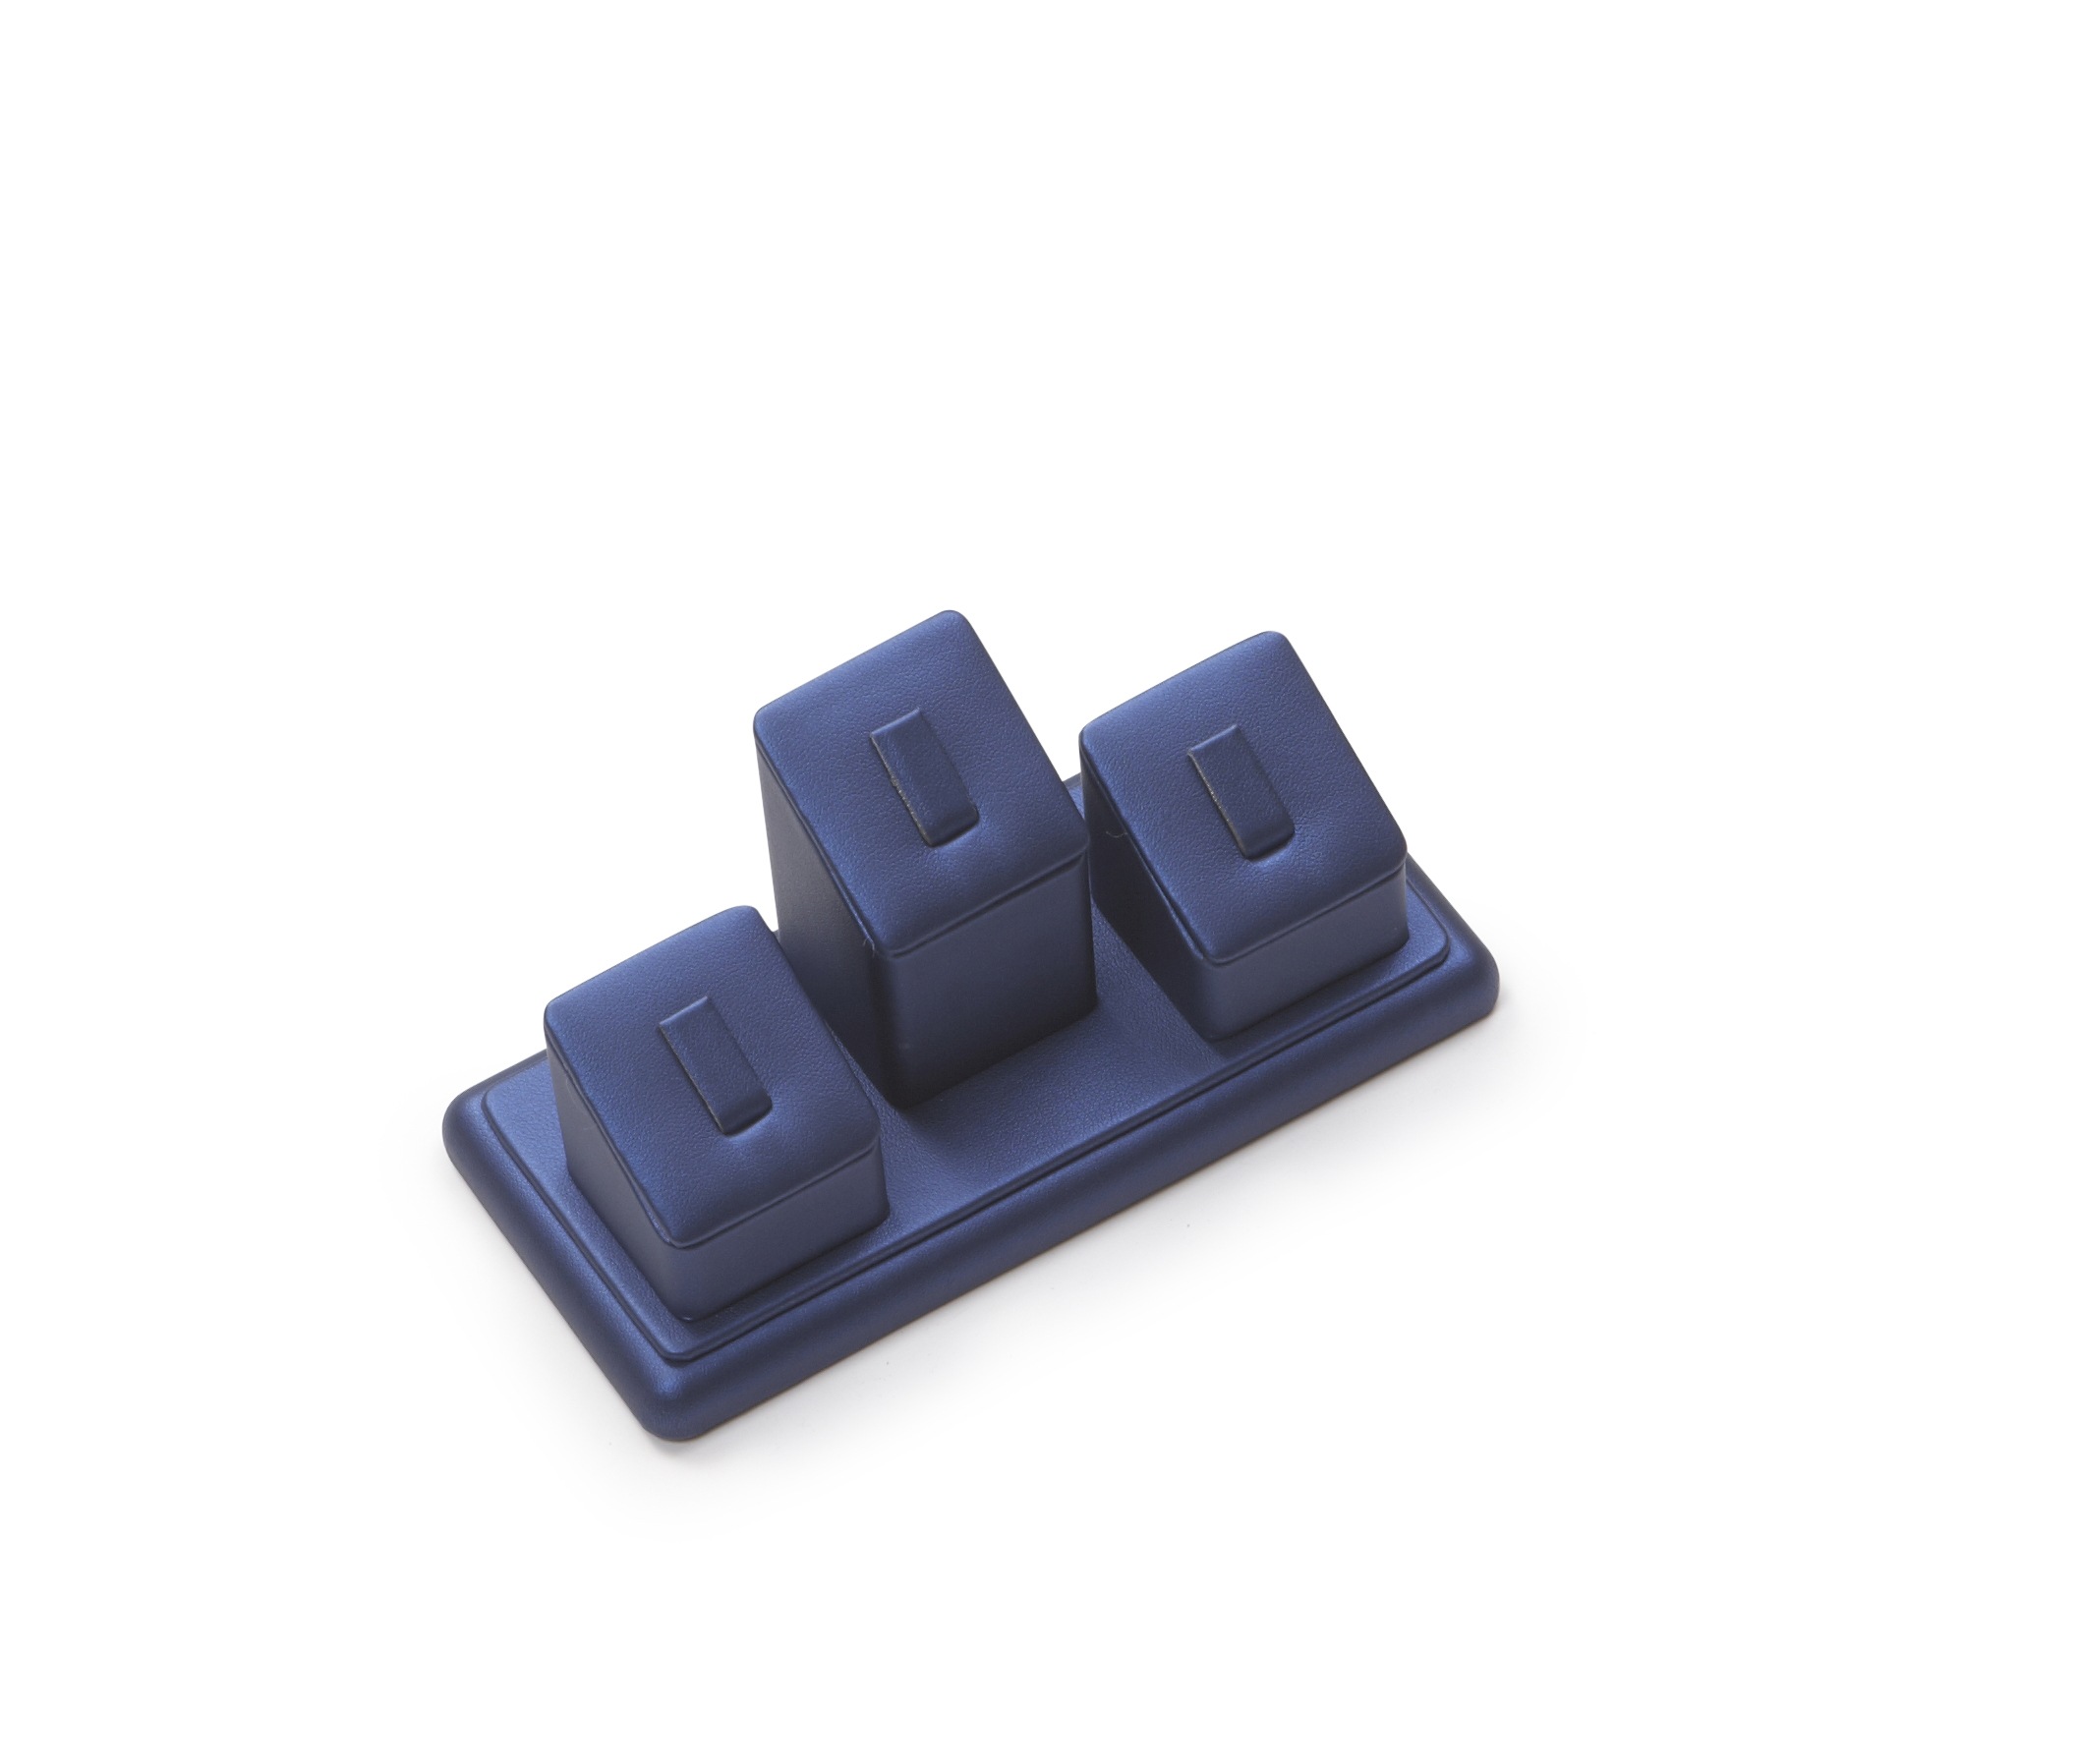 Navy Blue Leatherette 3 Clip Ring Stand